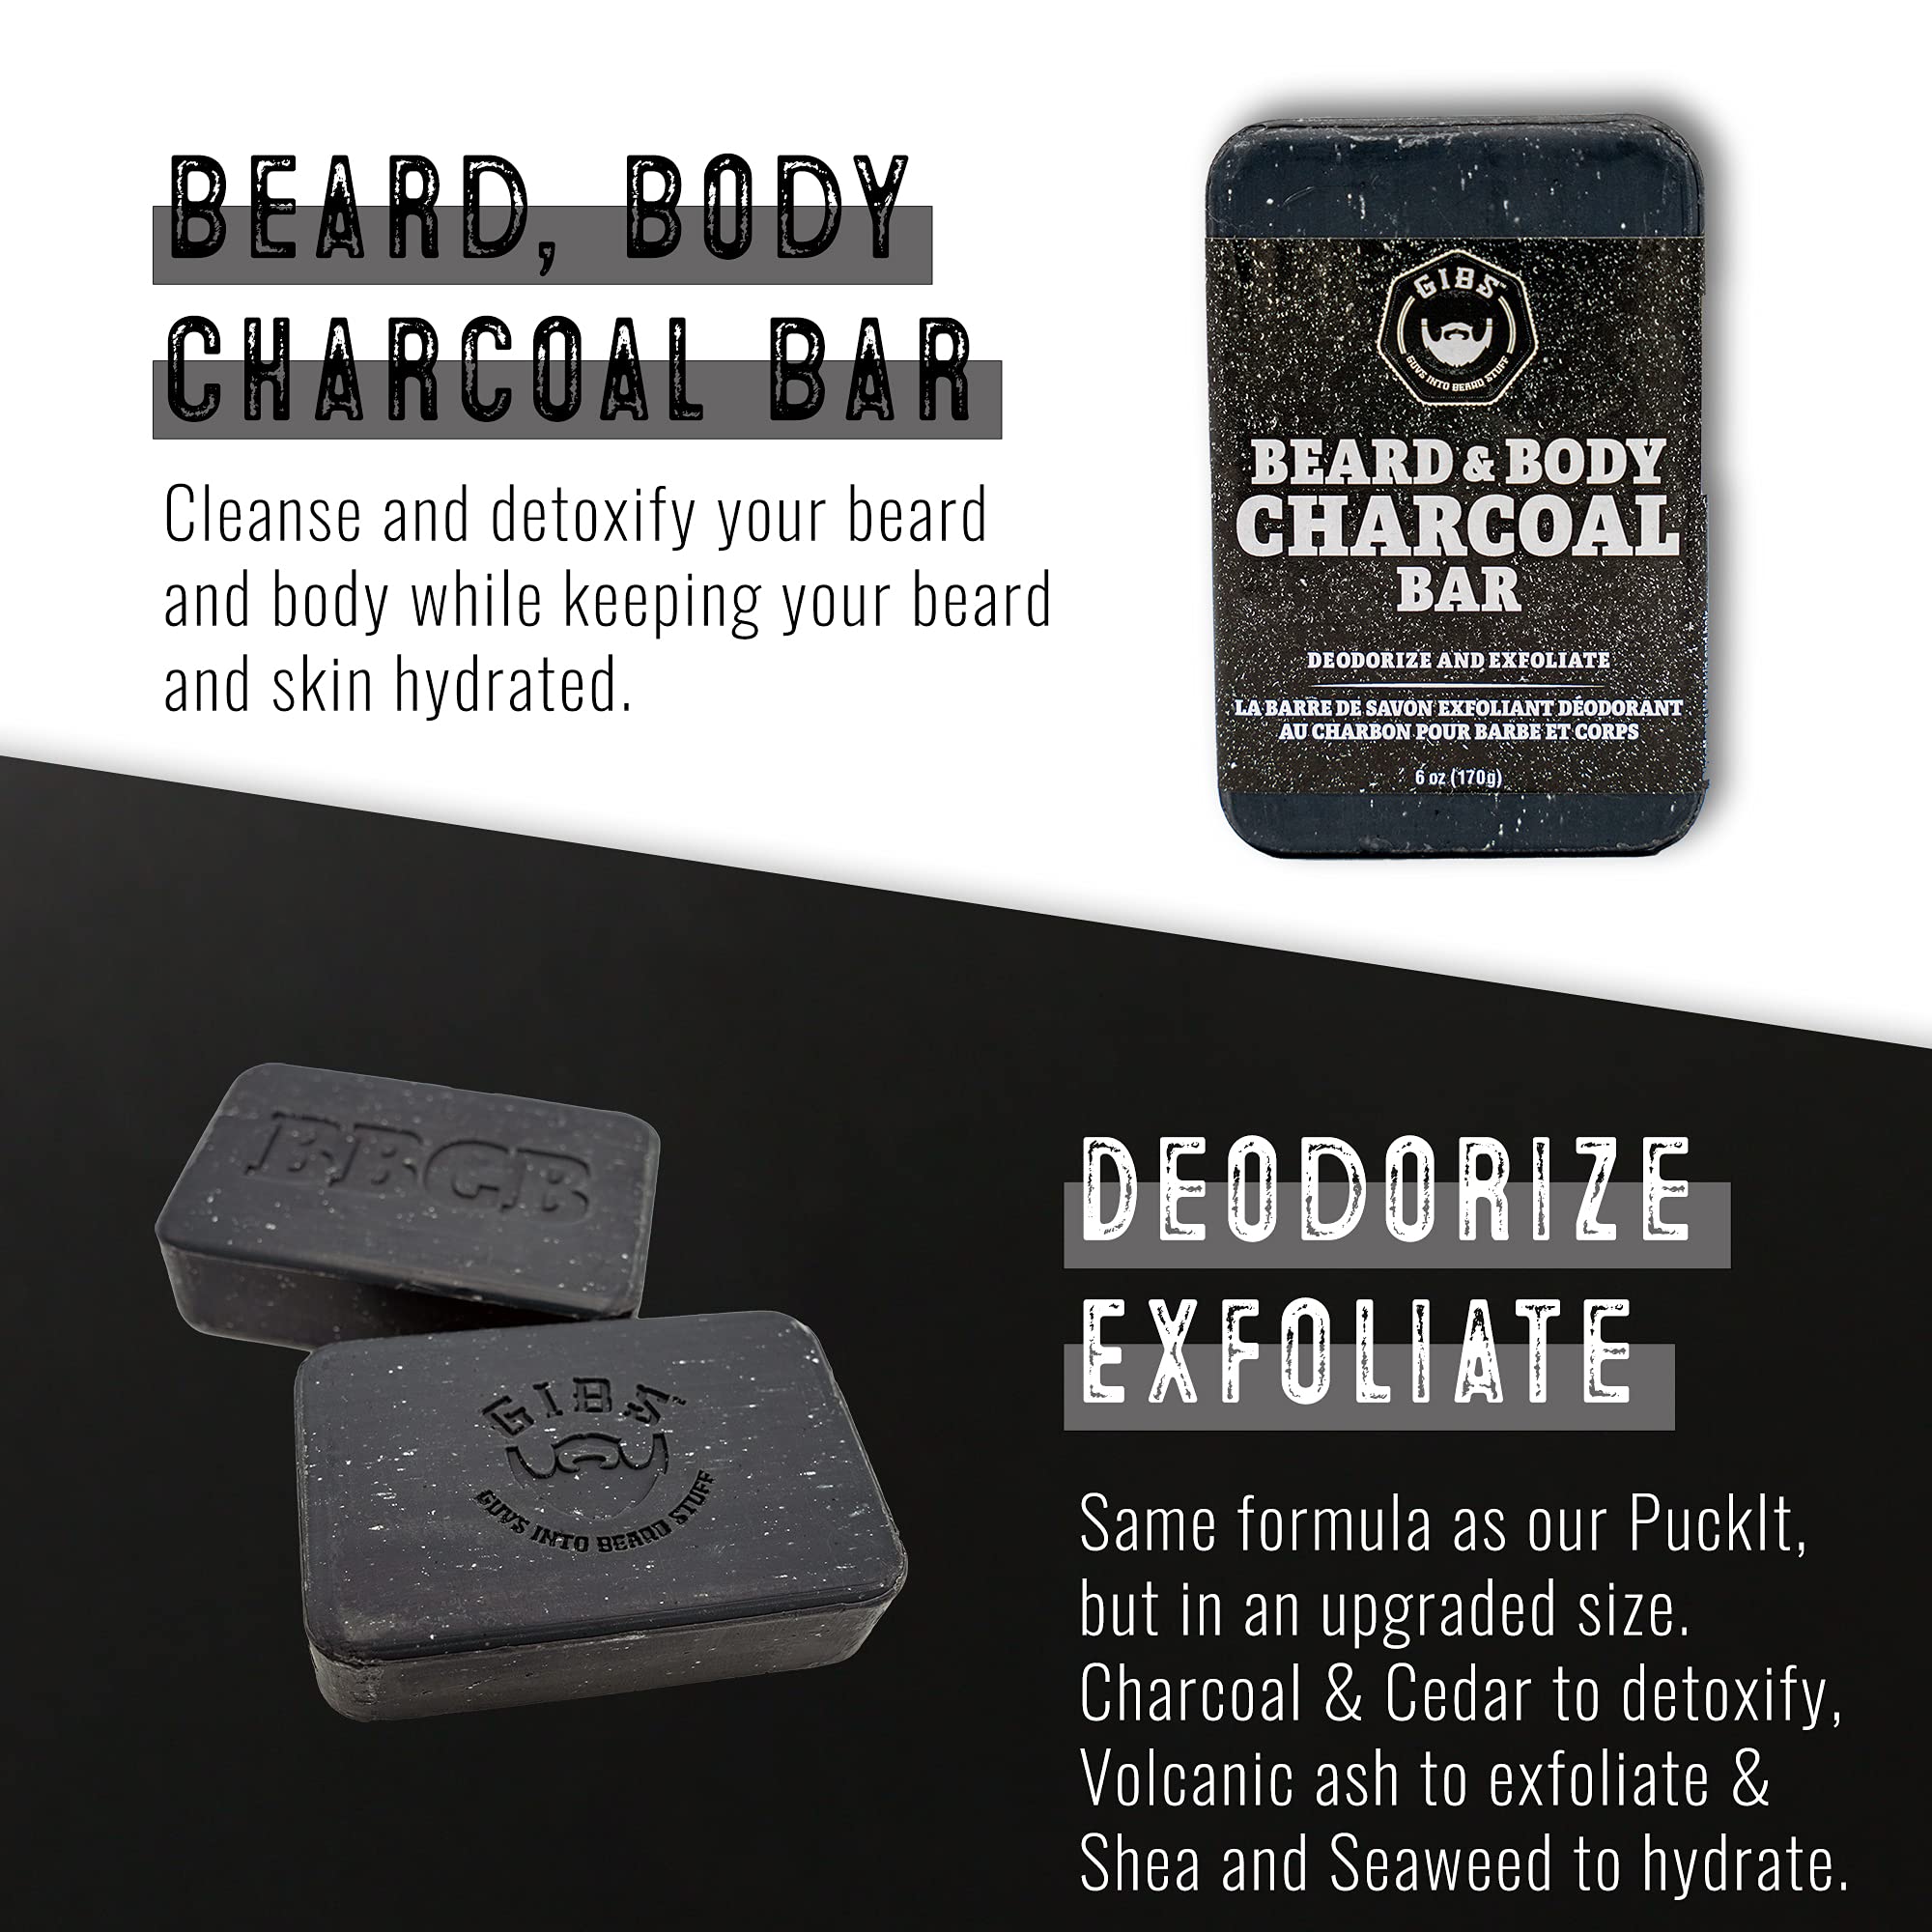 GIBS Grooming BBC Charcoal Bar - Deodorizing Soap, Spicy and rich with hints of cardamom, pepper, leather and clove., 6 oz.